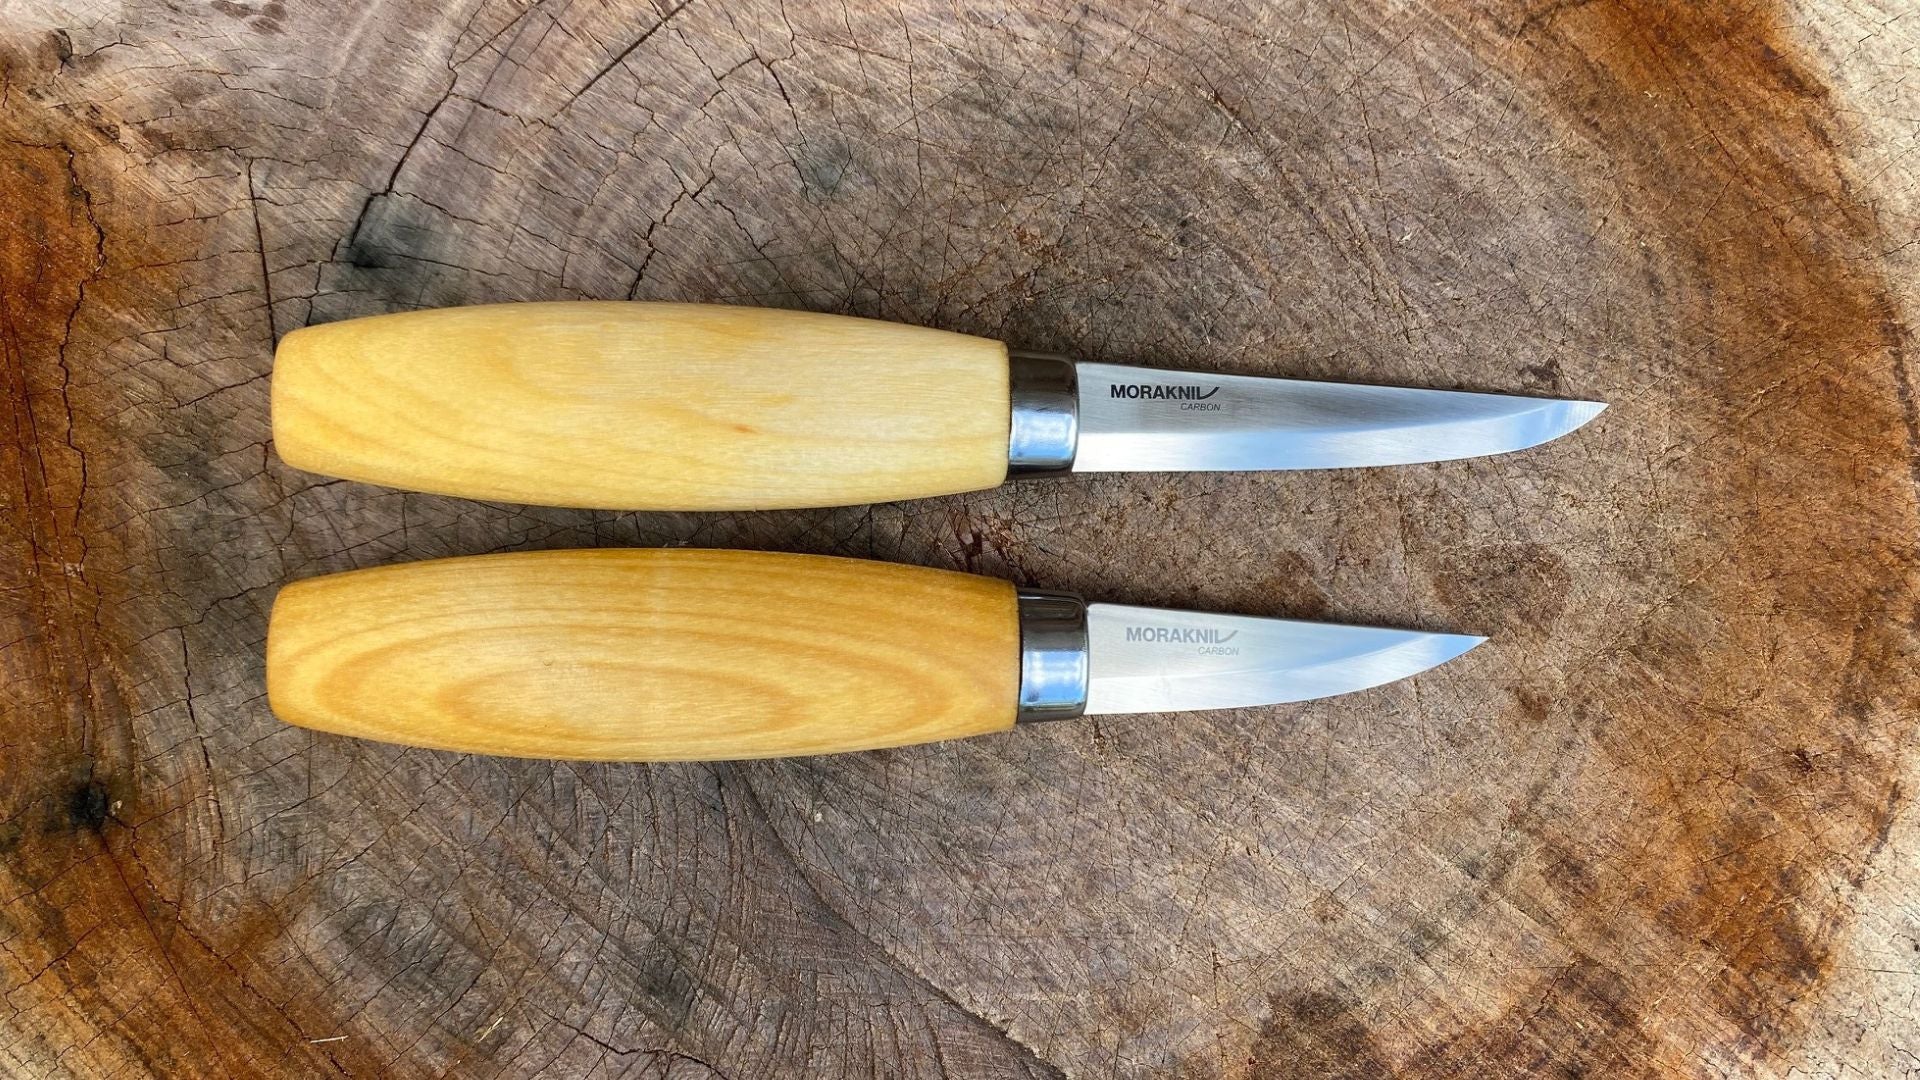 Mora 120 vs Mora 106: What is the difference?